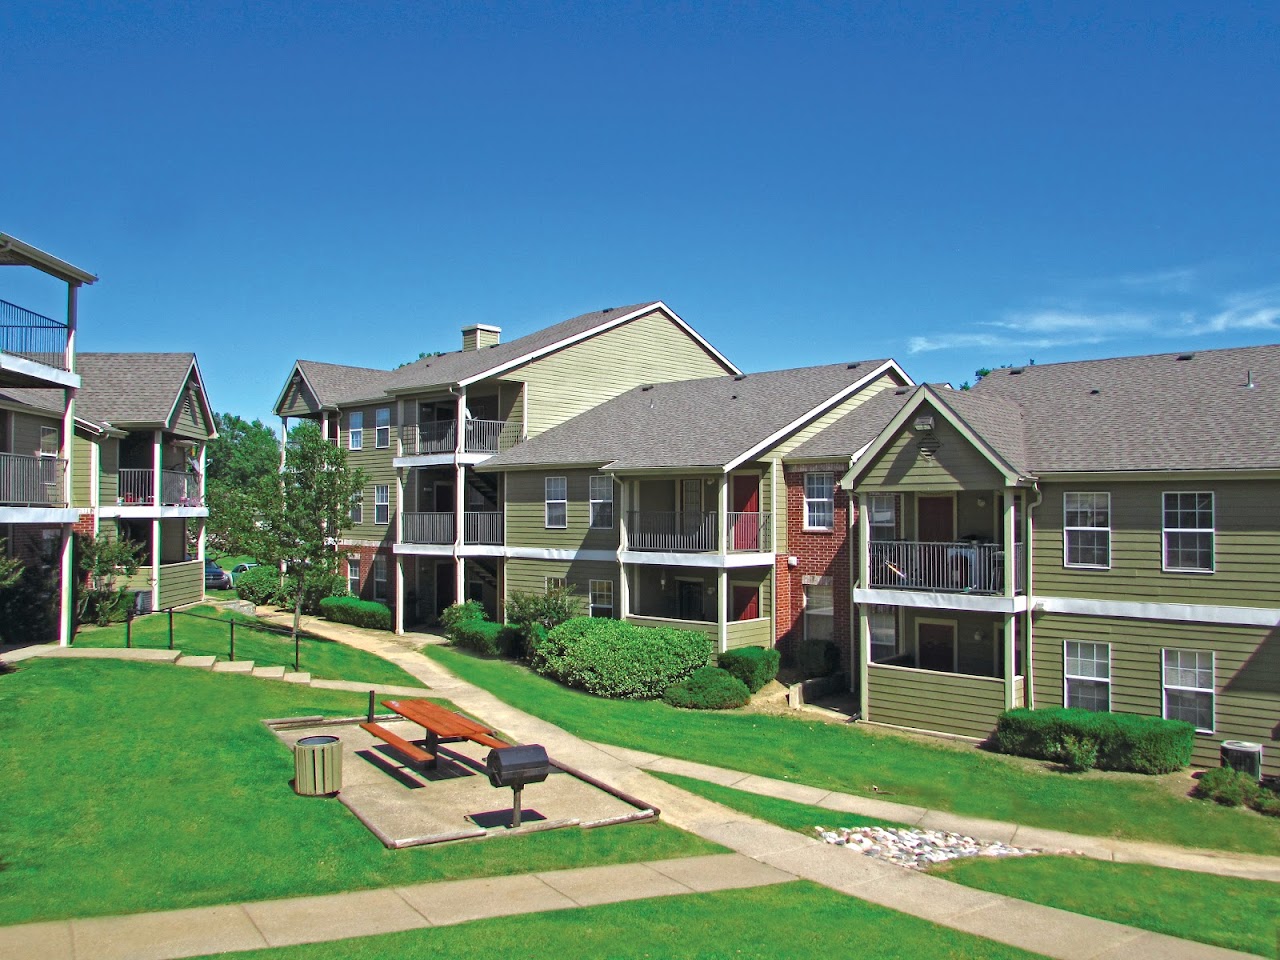 Photo of GABLE HILLS APTS. Affordable housing located at 7708 W PKWY BLVD TULSA, OK 74127